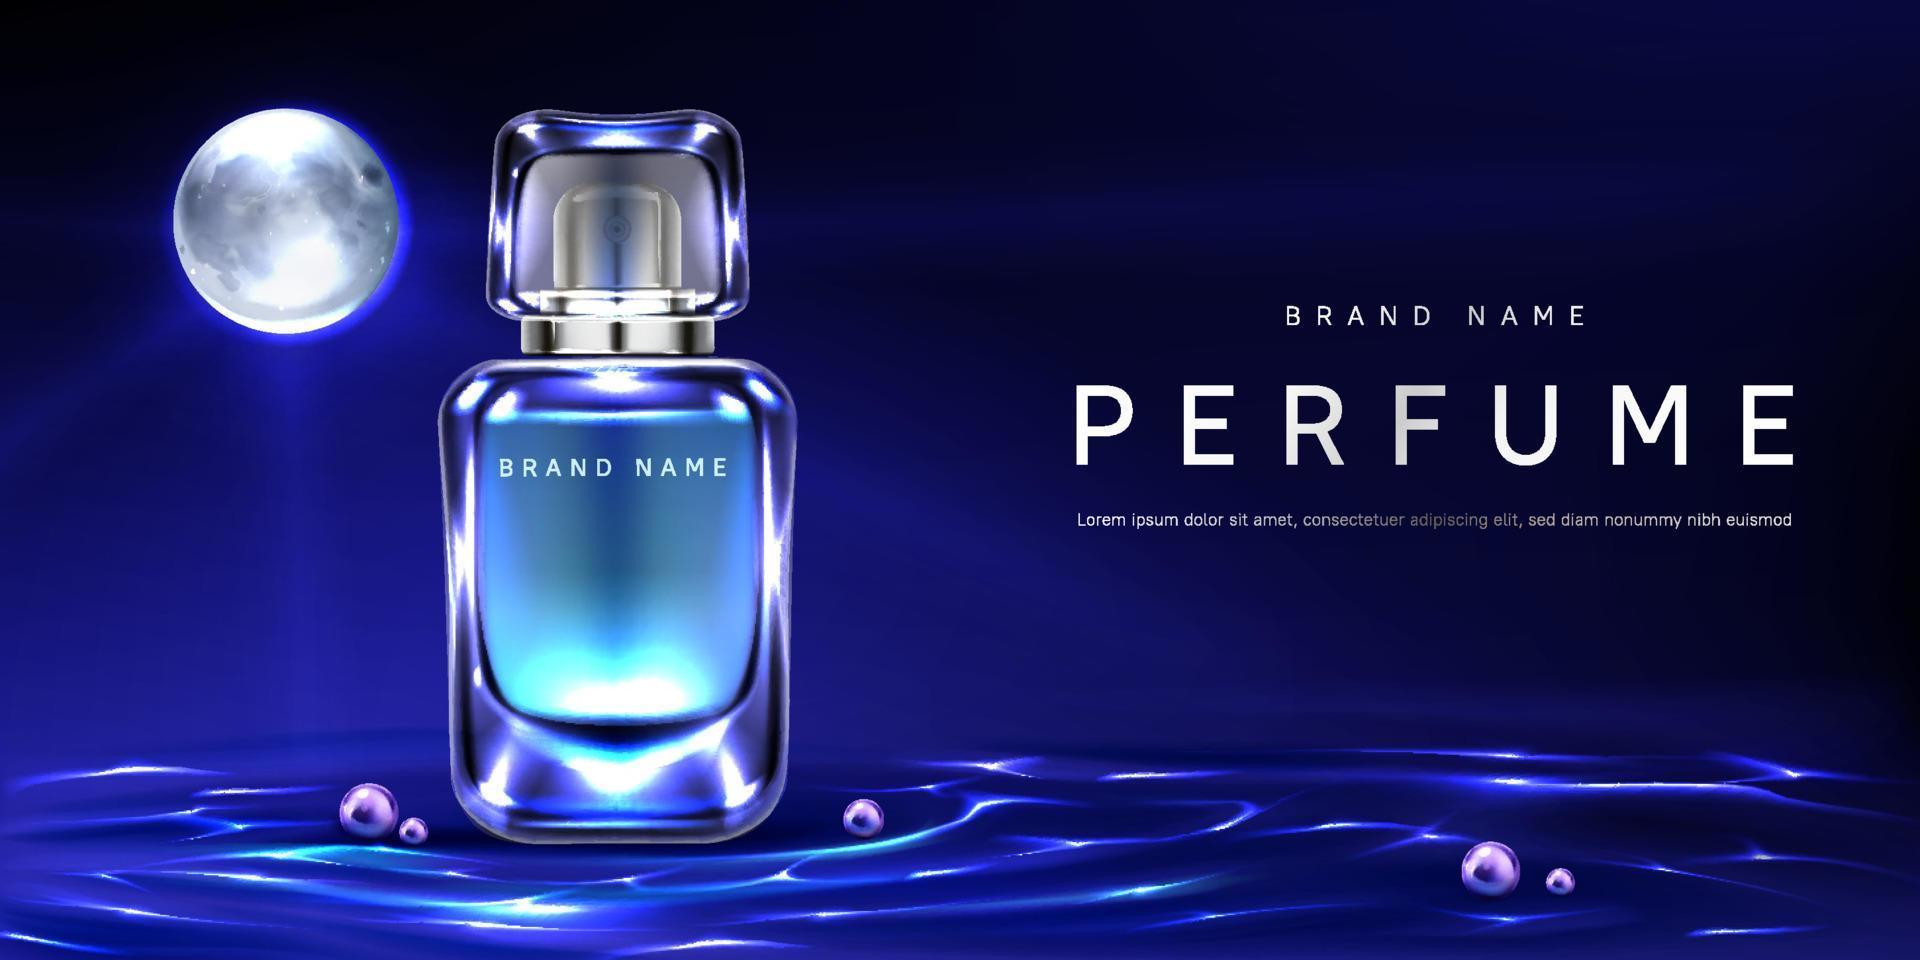 Perfume bottle on night water surface background vector